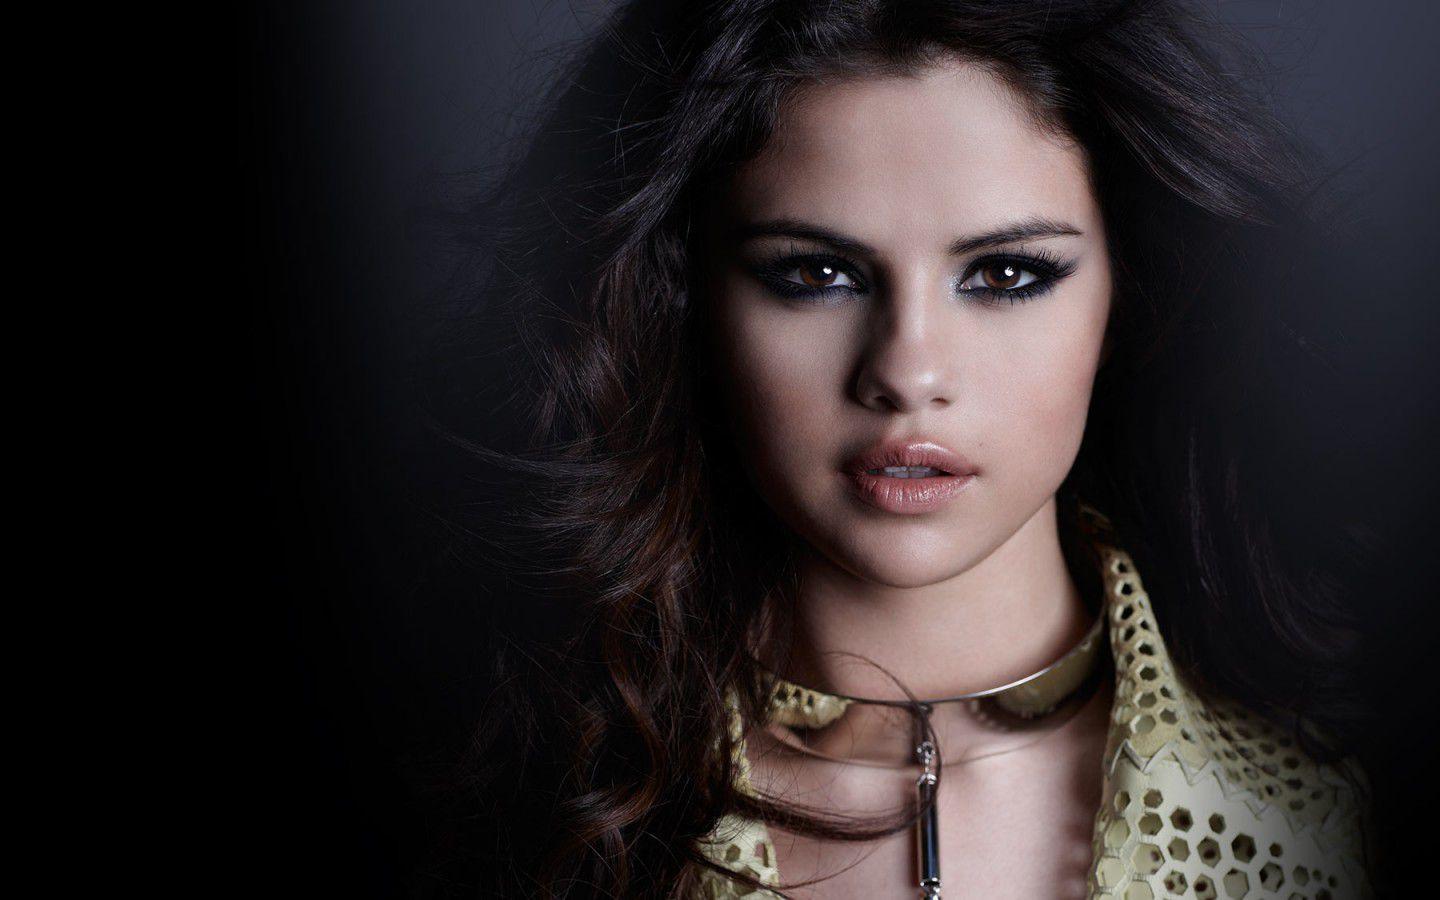 Selena Gomez Background, Wallpaper and Picture for desktop and mobile